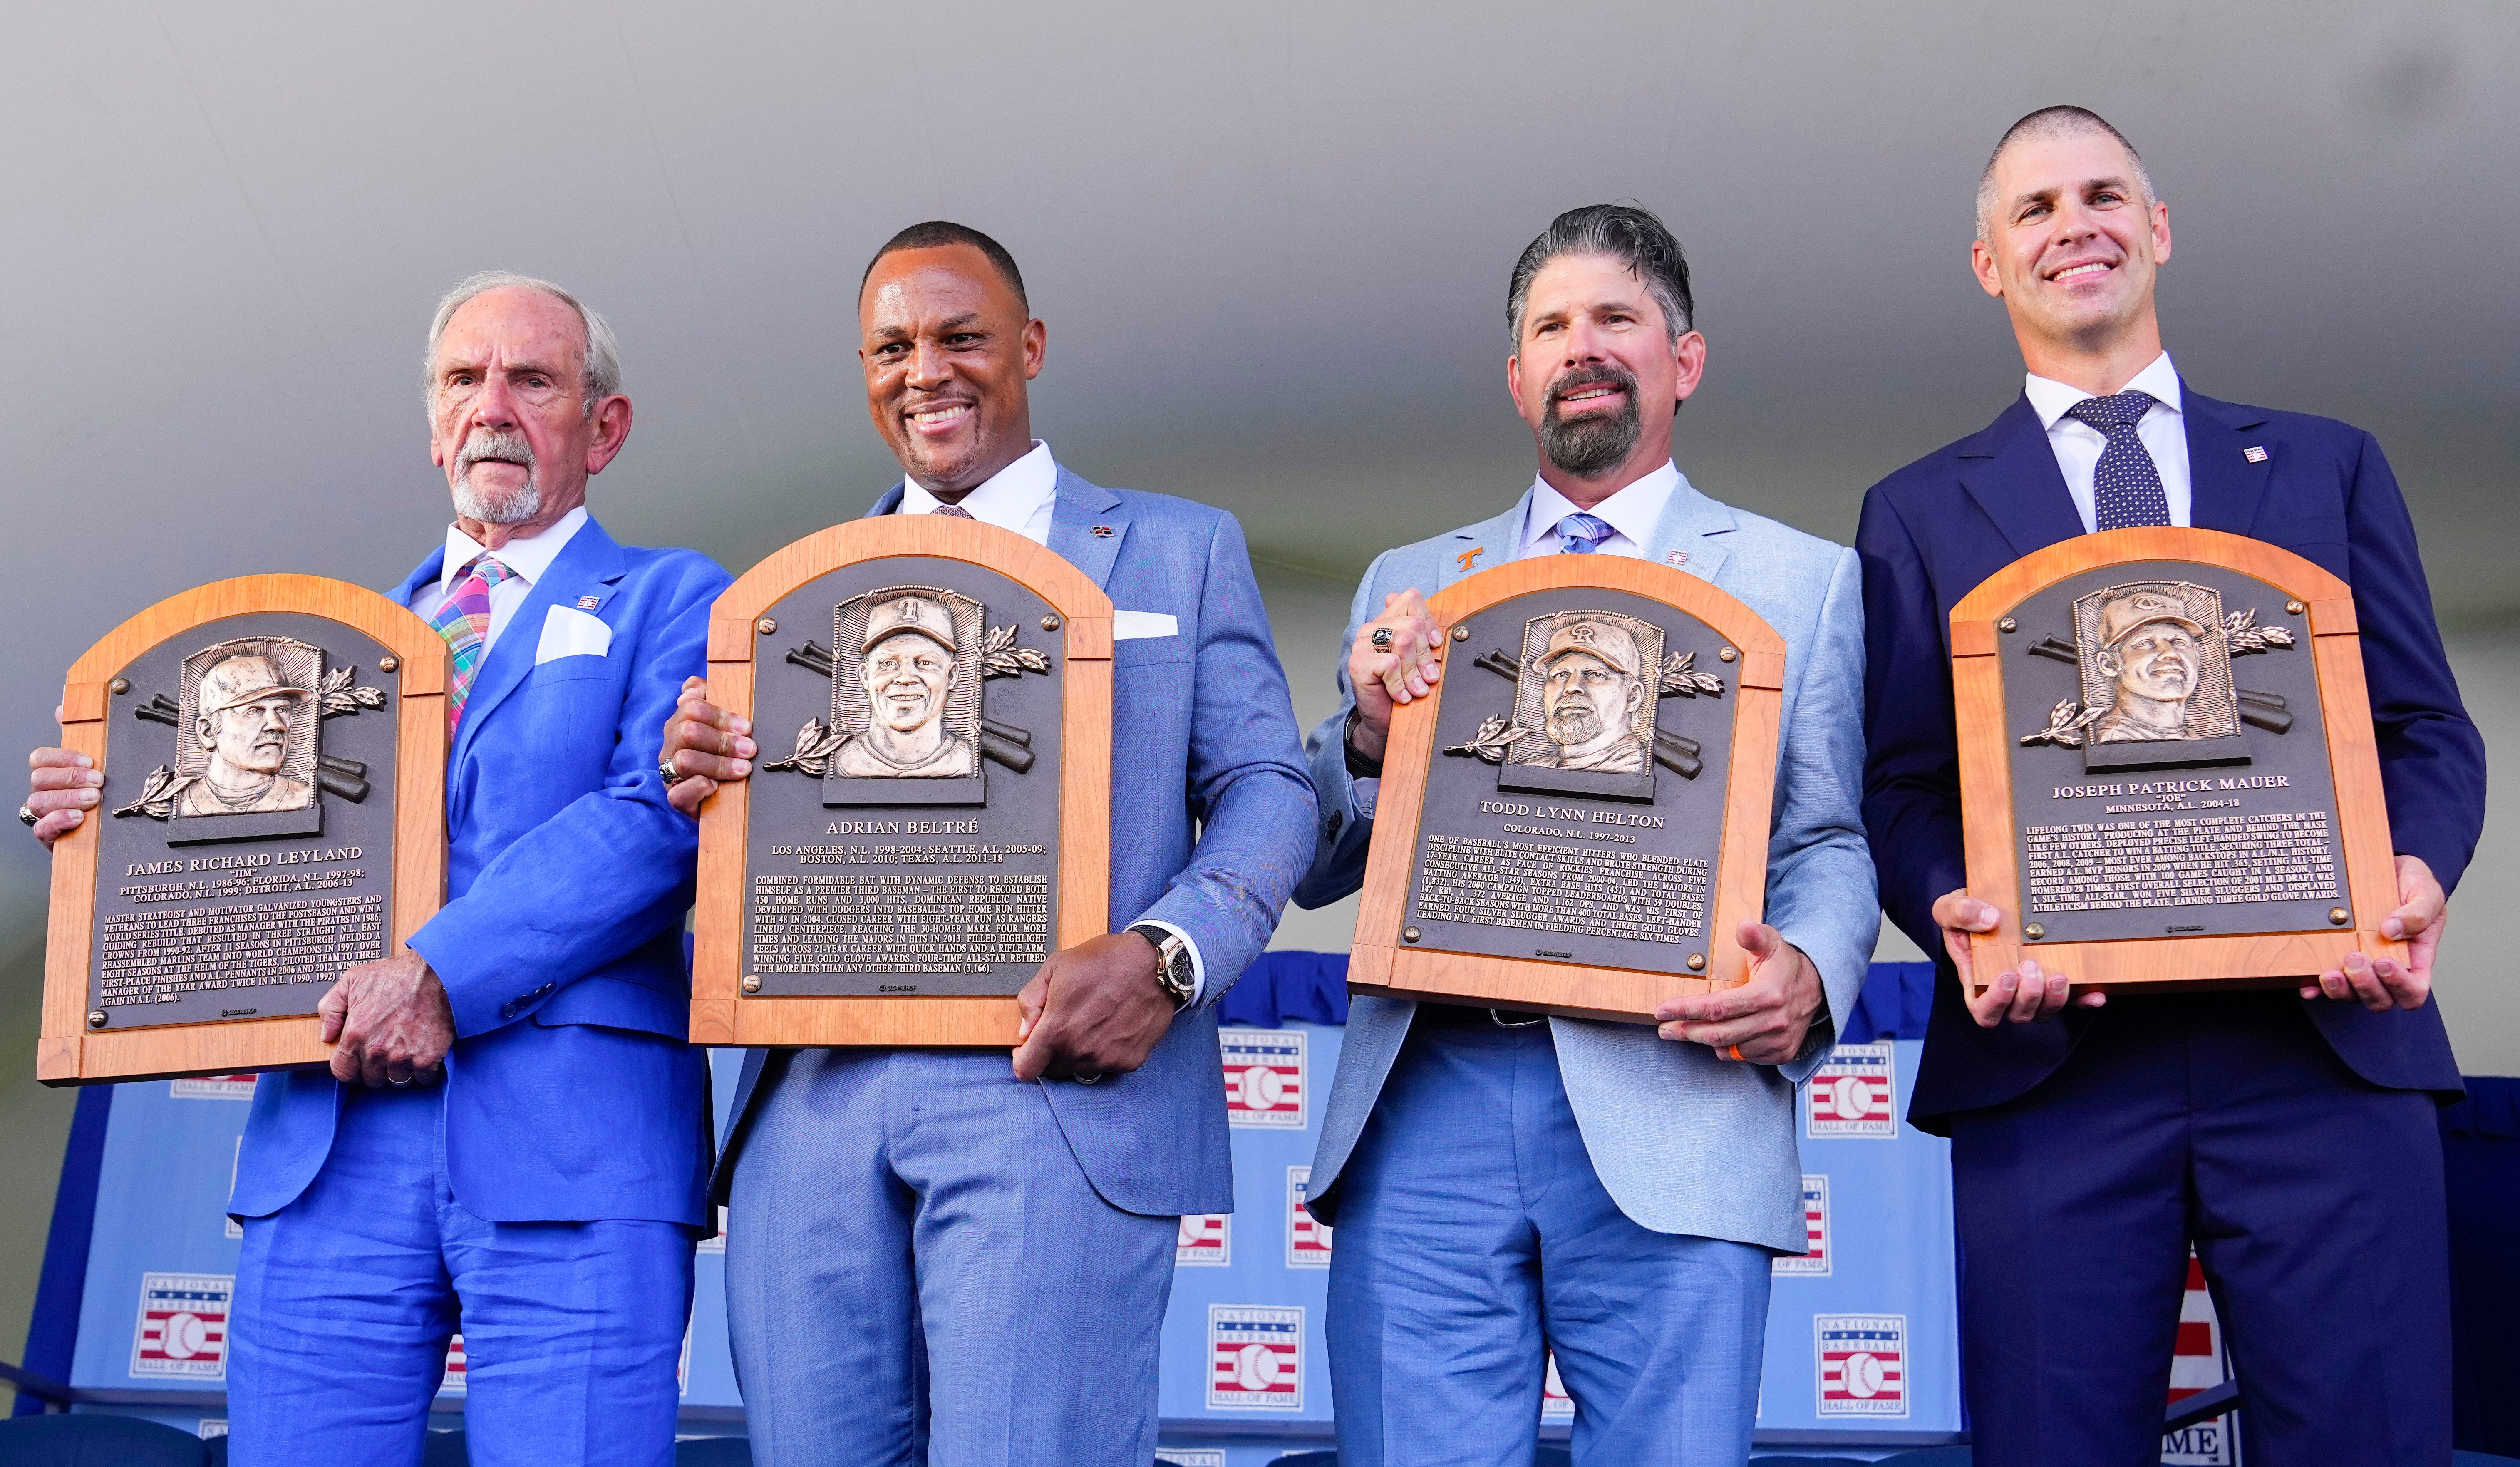 Emotional Baseball Hall of Fame speeches filled with humility, humor, appreciation